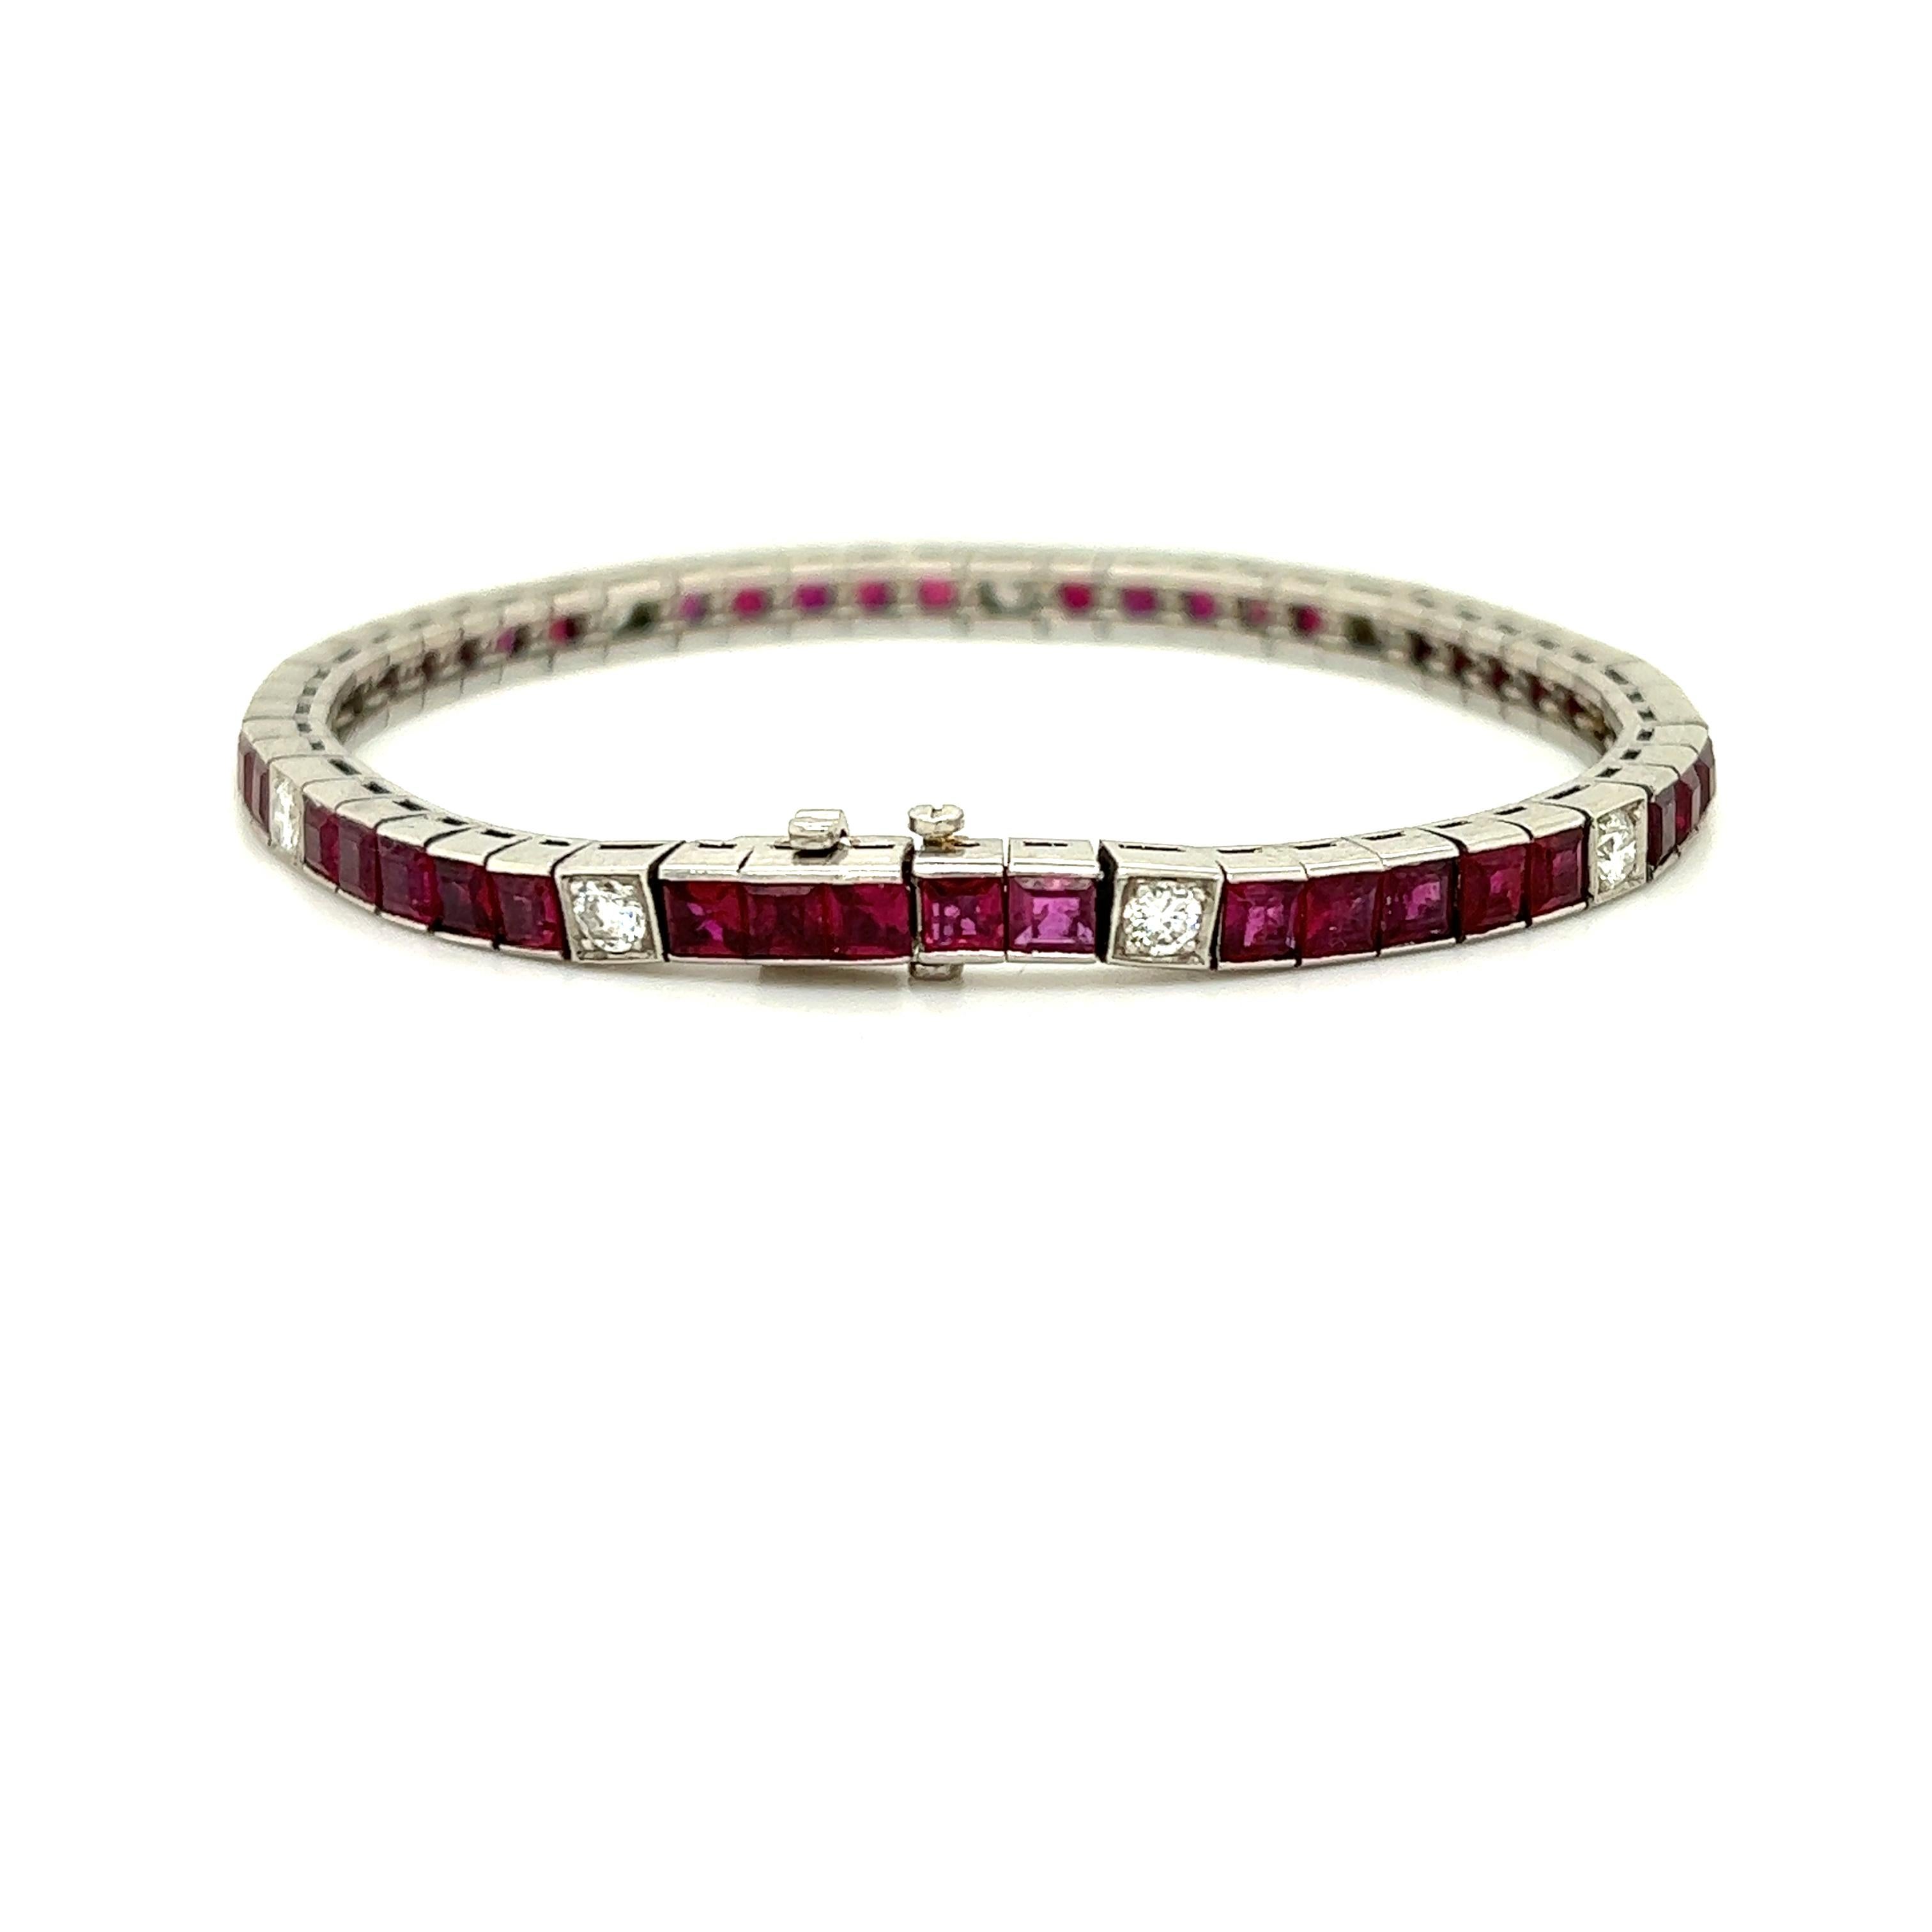 Exceptional creation crafted in platinum. This straight line tennis bracelet is crafted with earth made natural ruby gemstone and diamonds. There are 45 rubies in this design all carre cut, each weighing approximately 0.20 carat. The rubies display